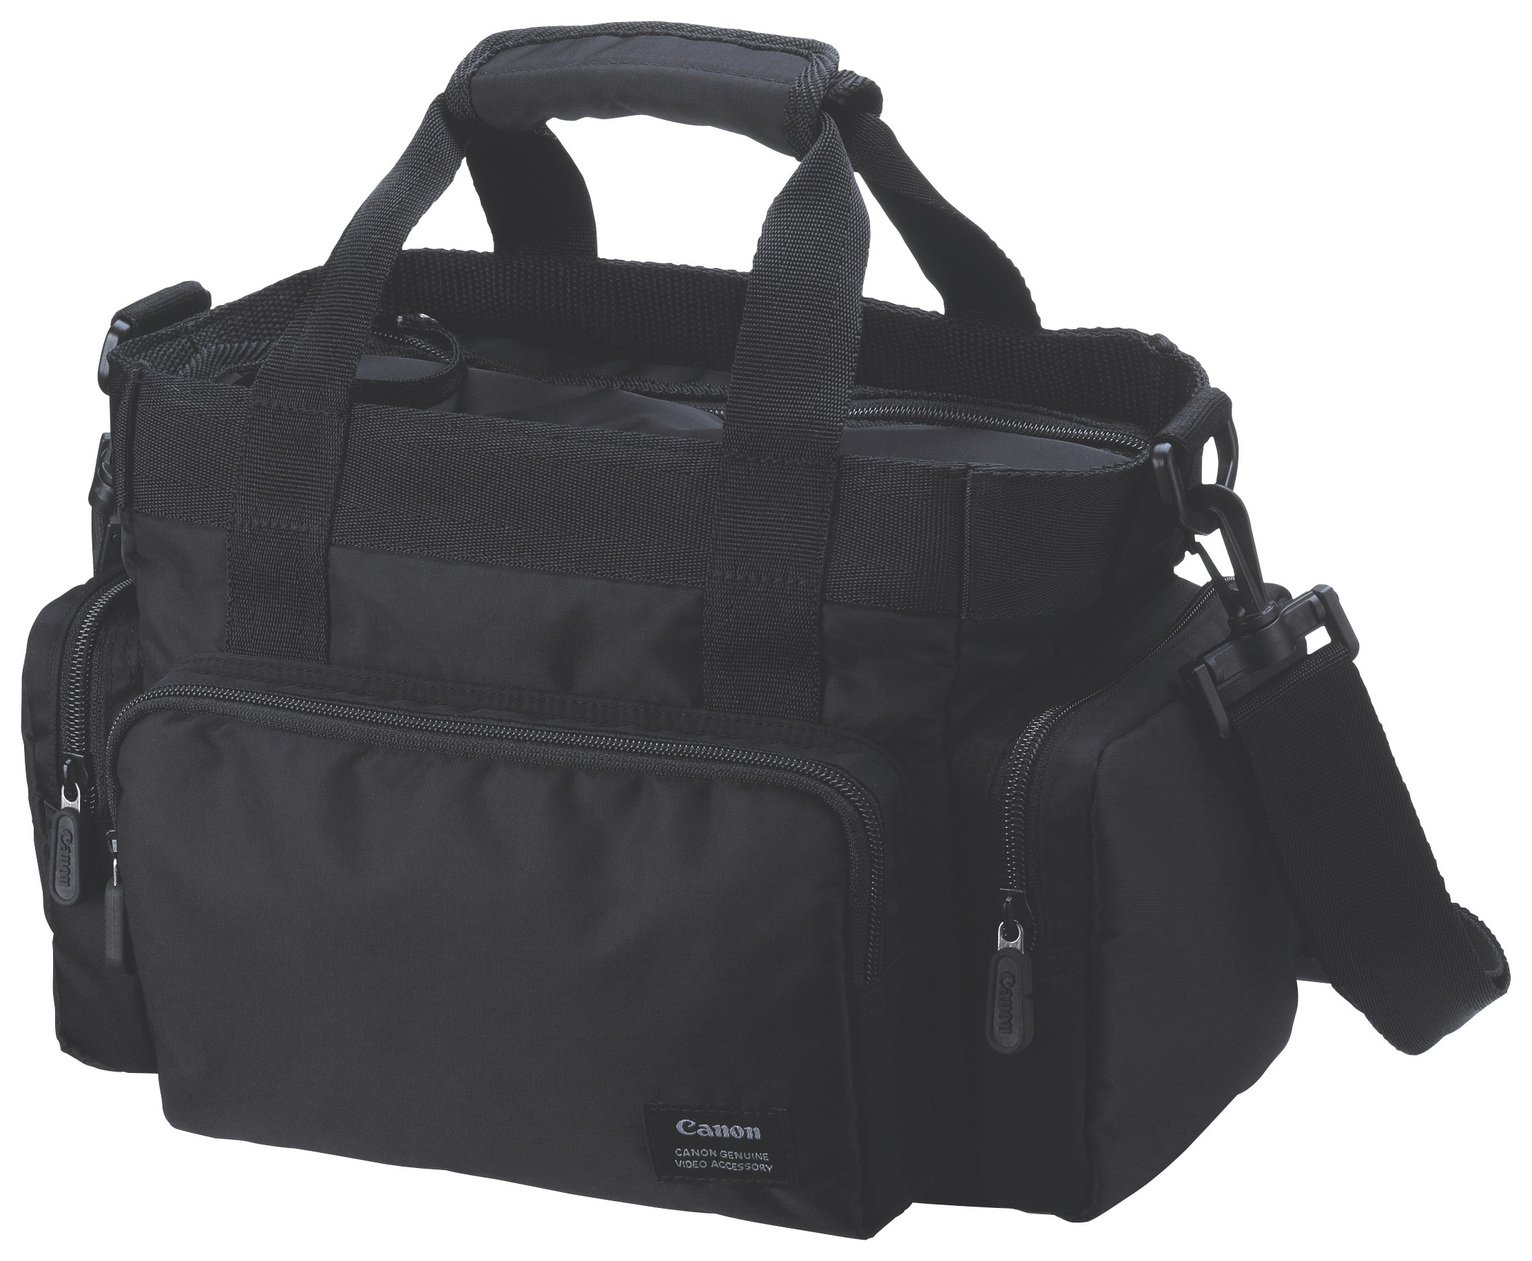 Canon Soft System Camcorder Bag review